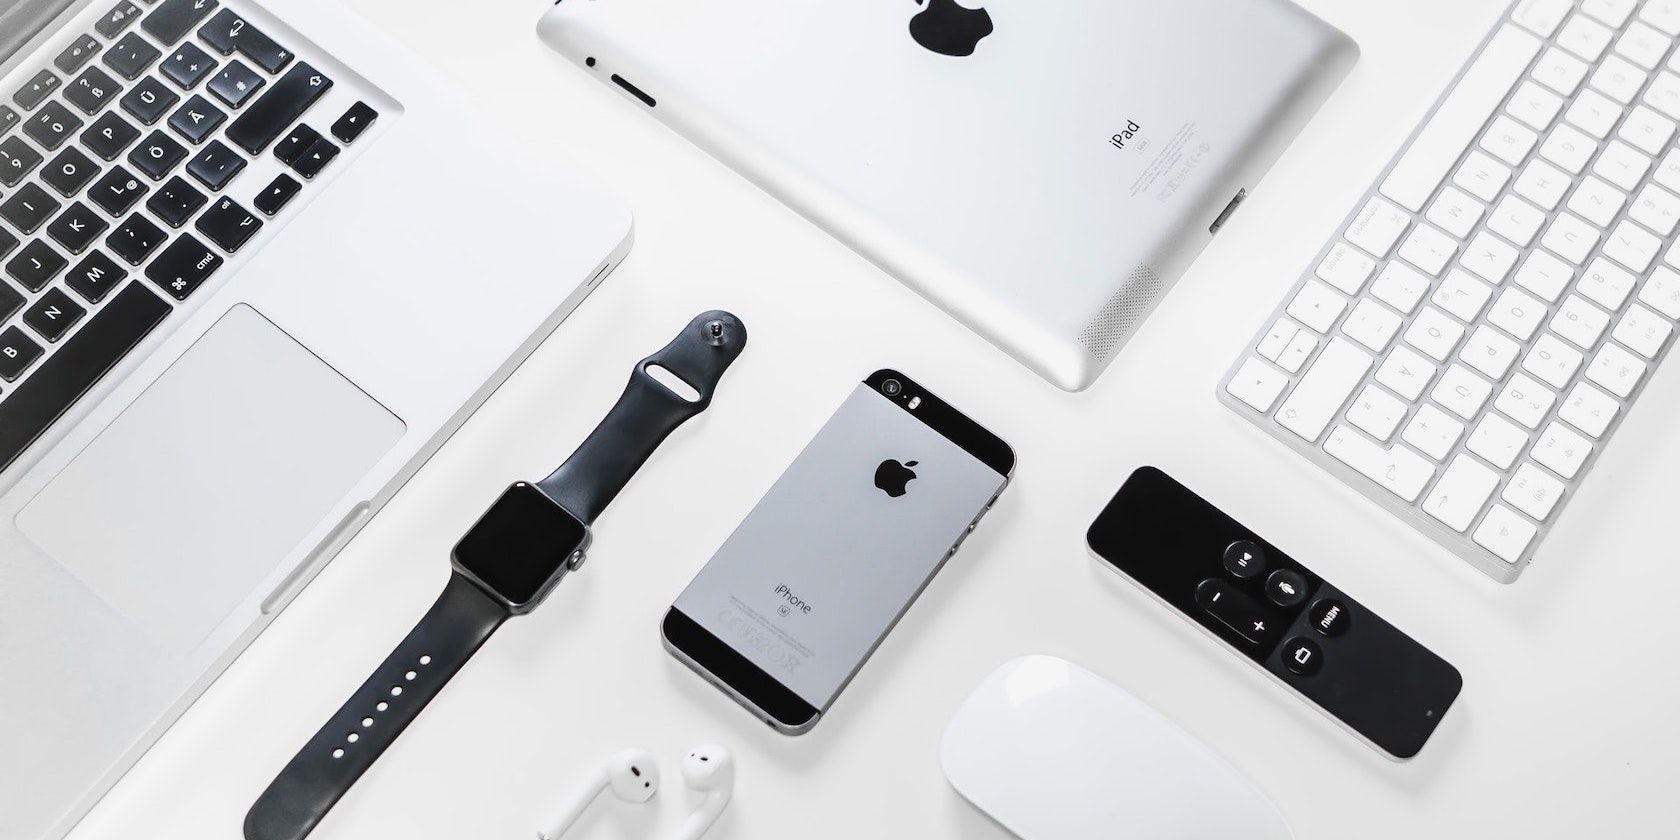 iPhone, Apple Watch, iPad, and Macbook on a table